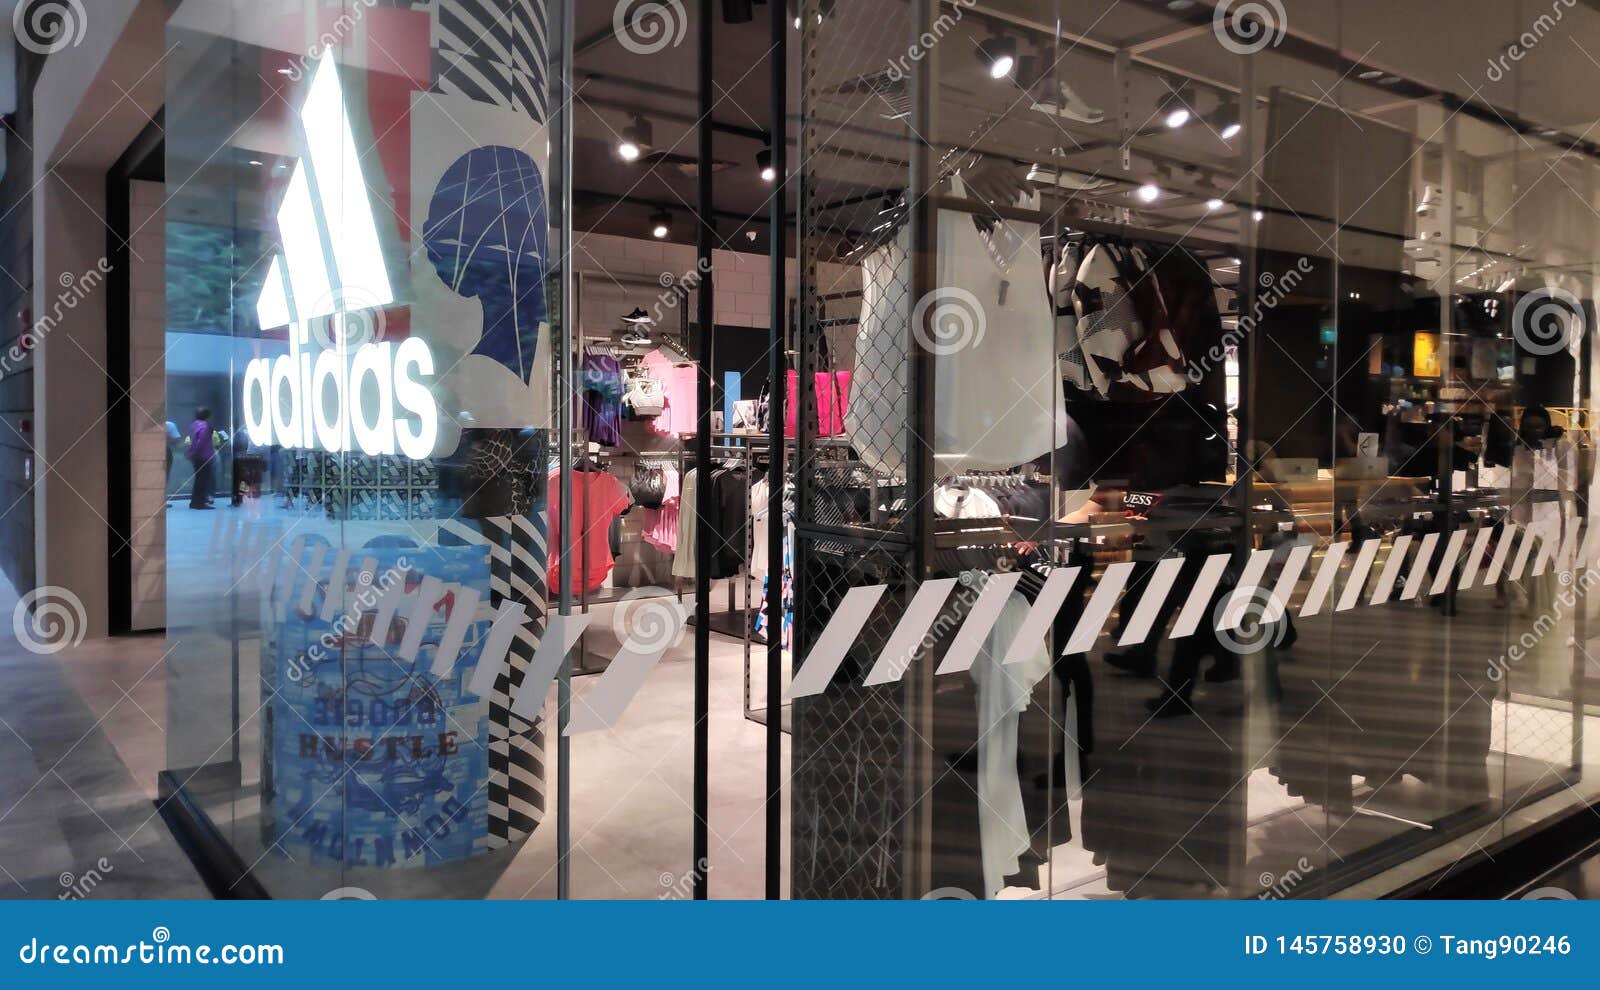 Meloso preposición haz Adidas Store Front Located Inside the Jewal Changi Airport in Singapore  Editorial Image - Image of landmark, commercial: 145758930